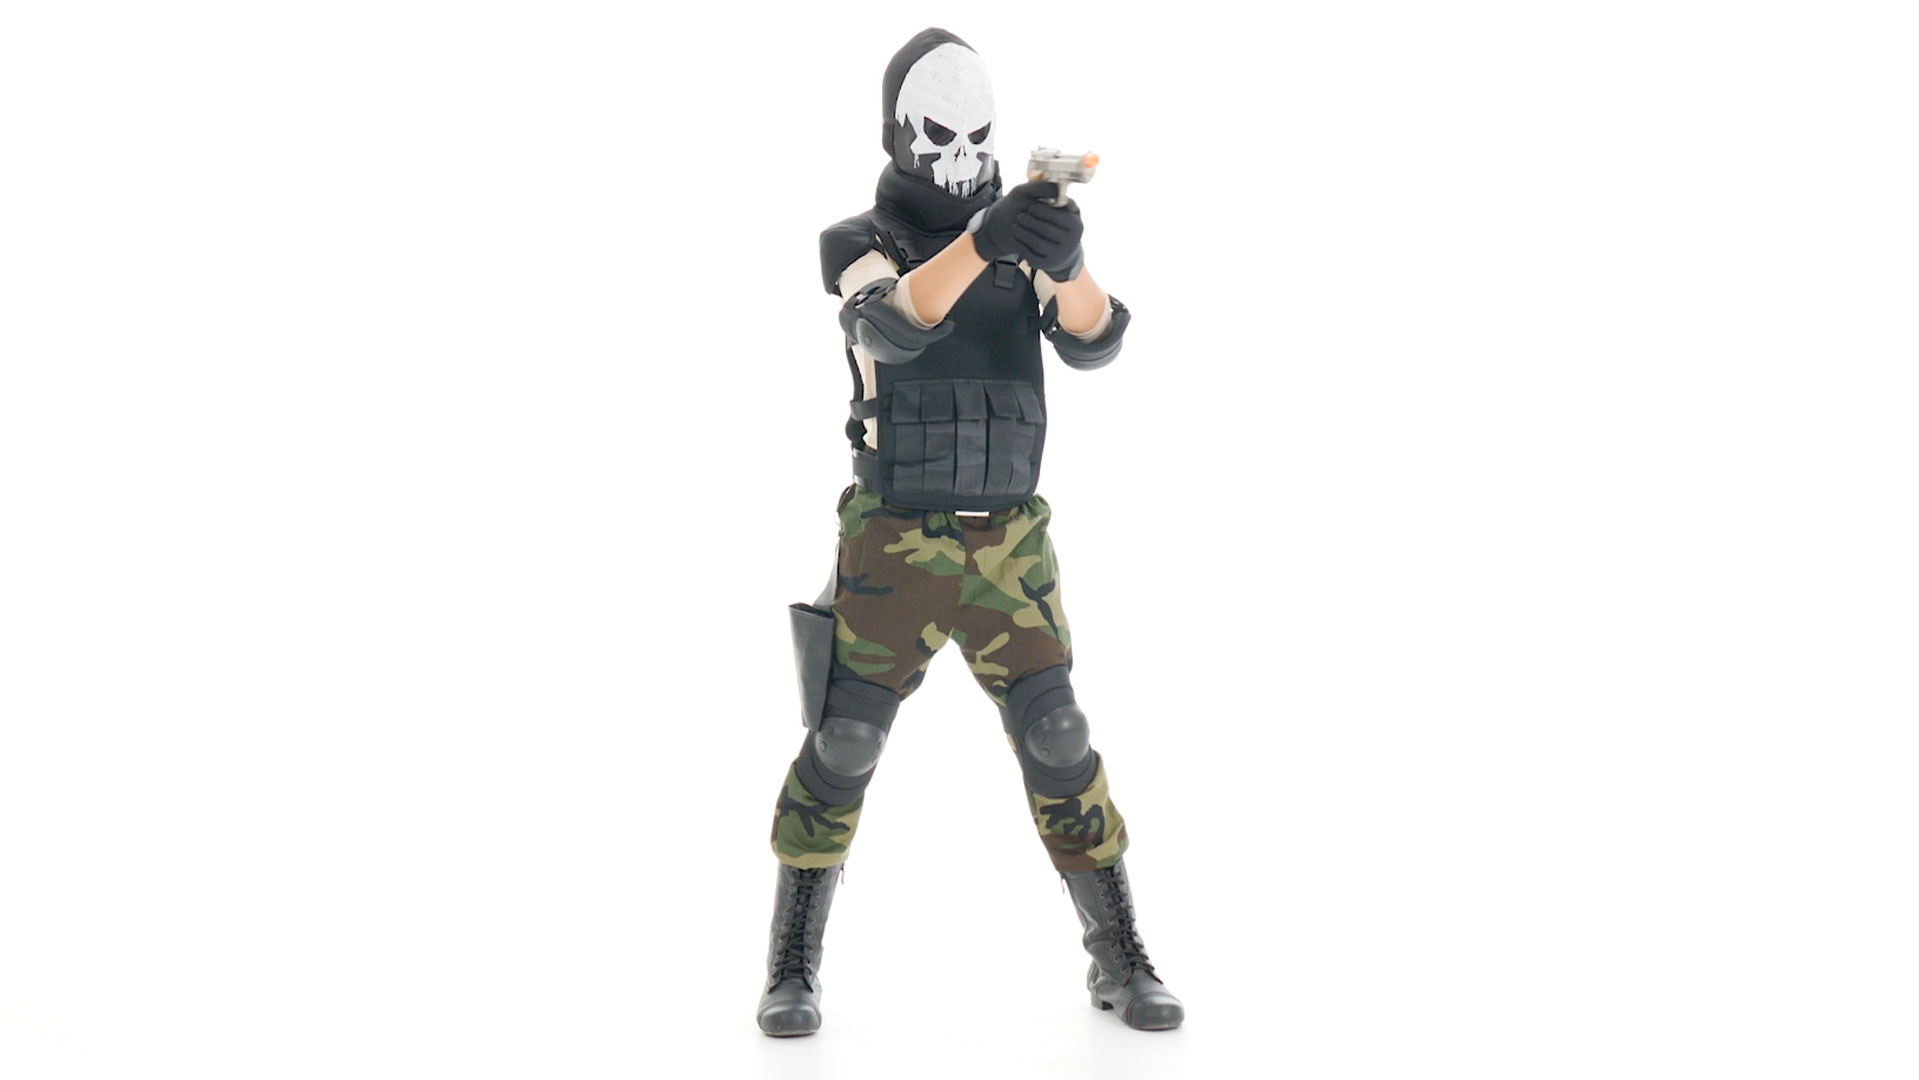 In this Skull Military Man Boys Costume your child will look like a true tactical powerhouse. This costume features everything your child needs to become a powerful military man like a skull face mask, camouflage pants, khaki shirt, vest and much more.